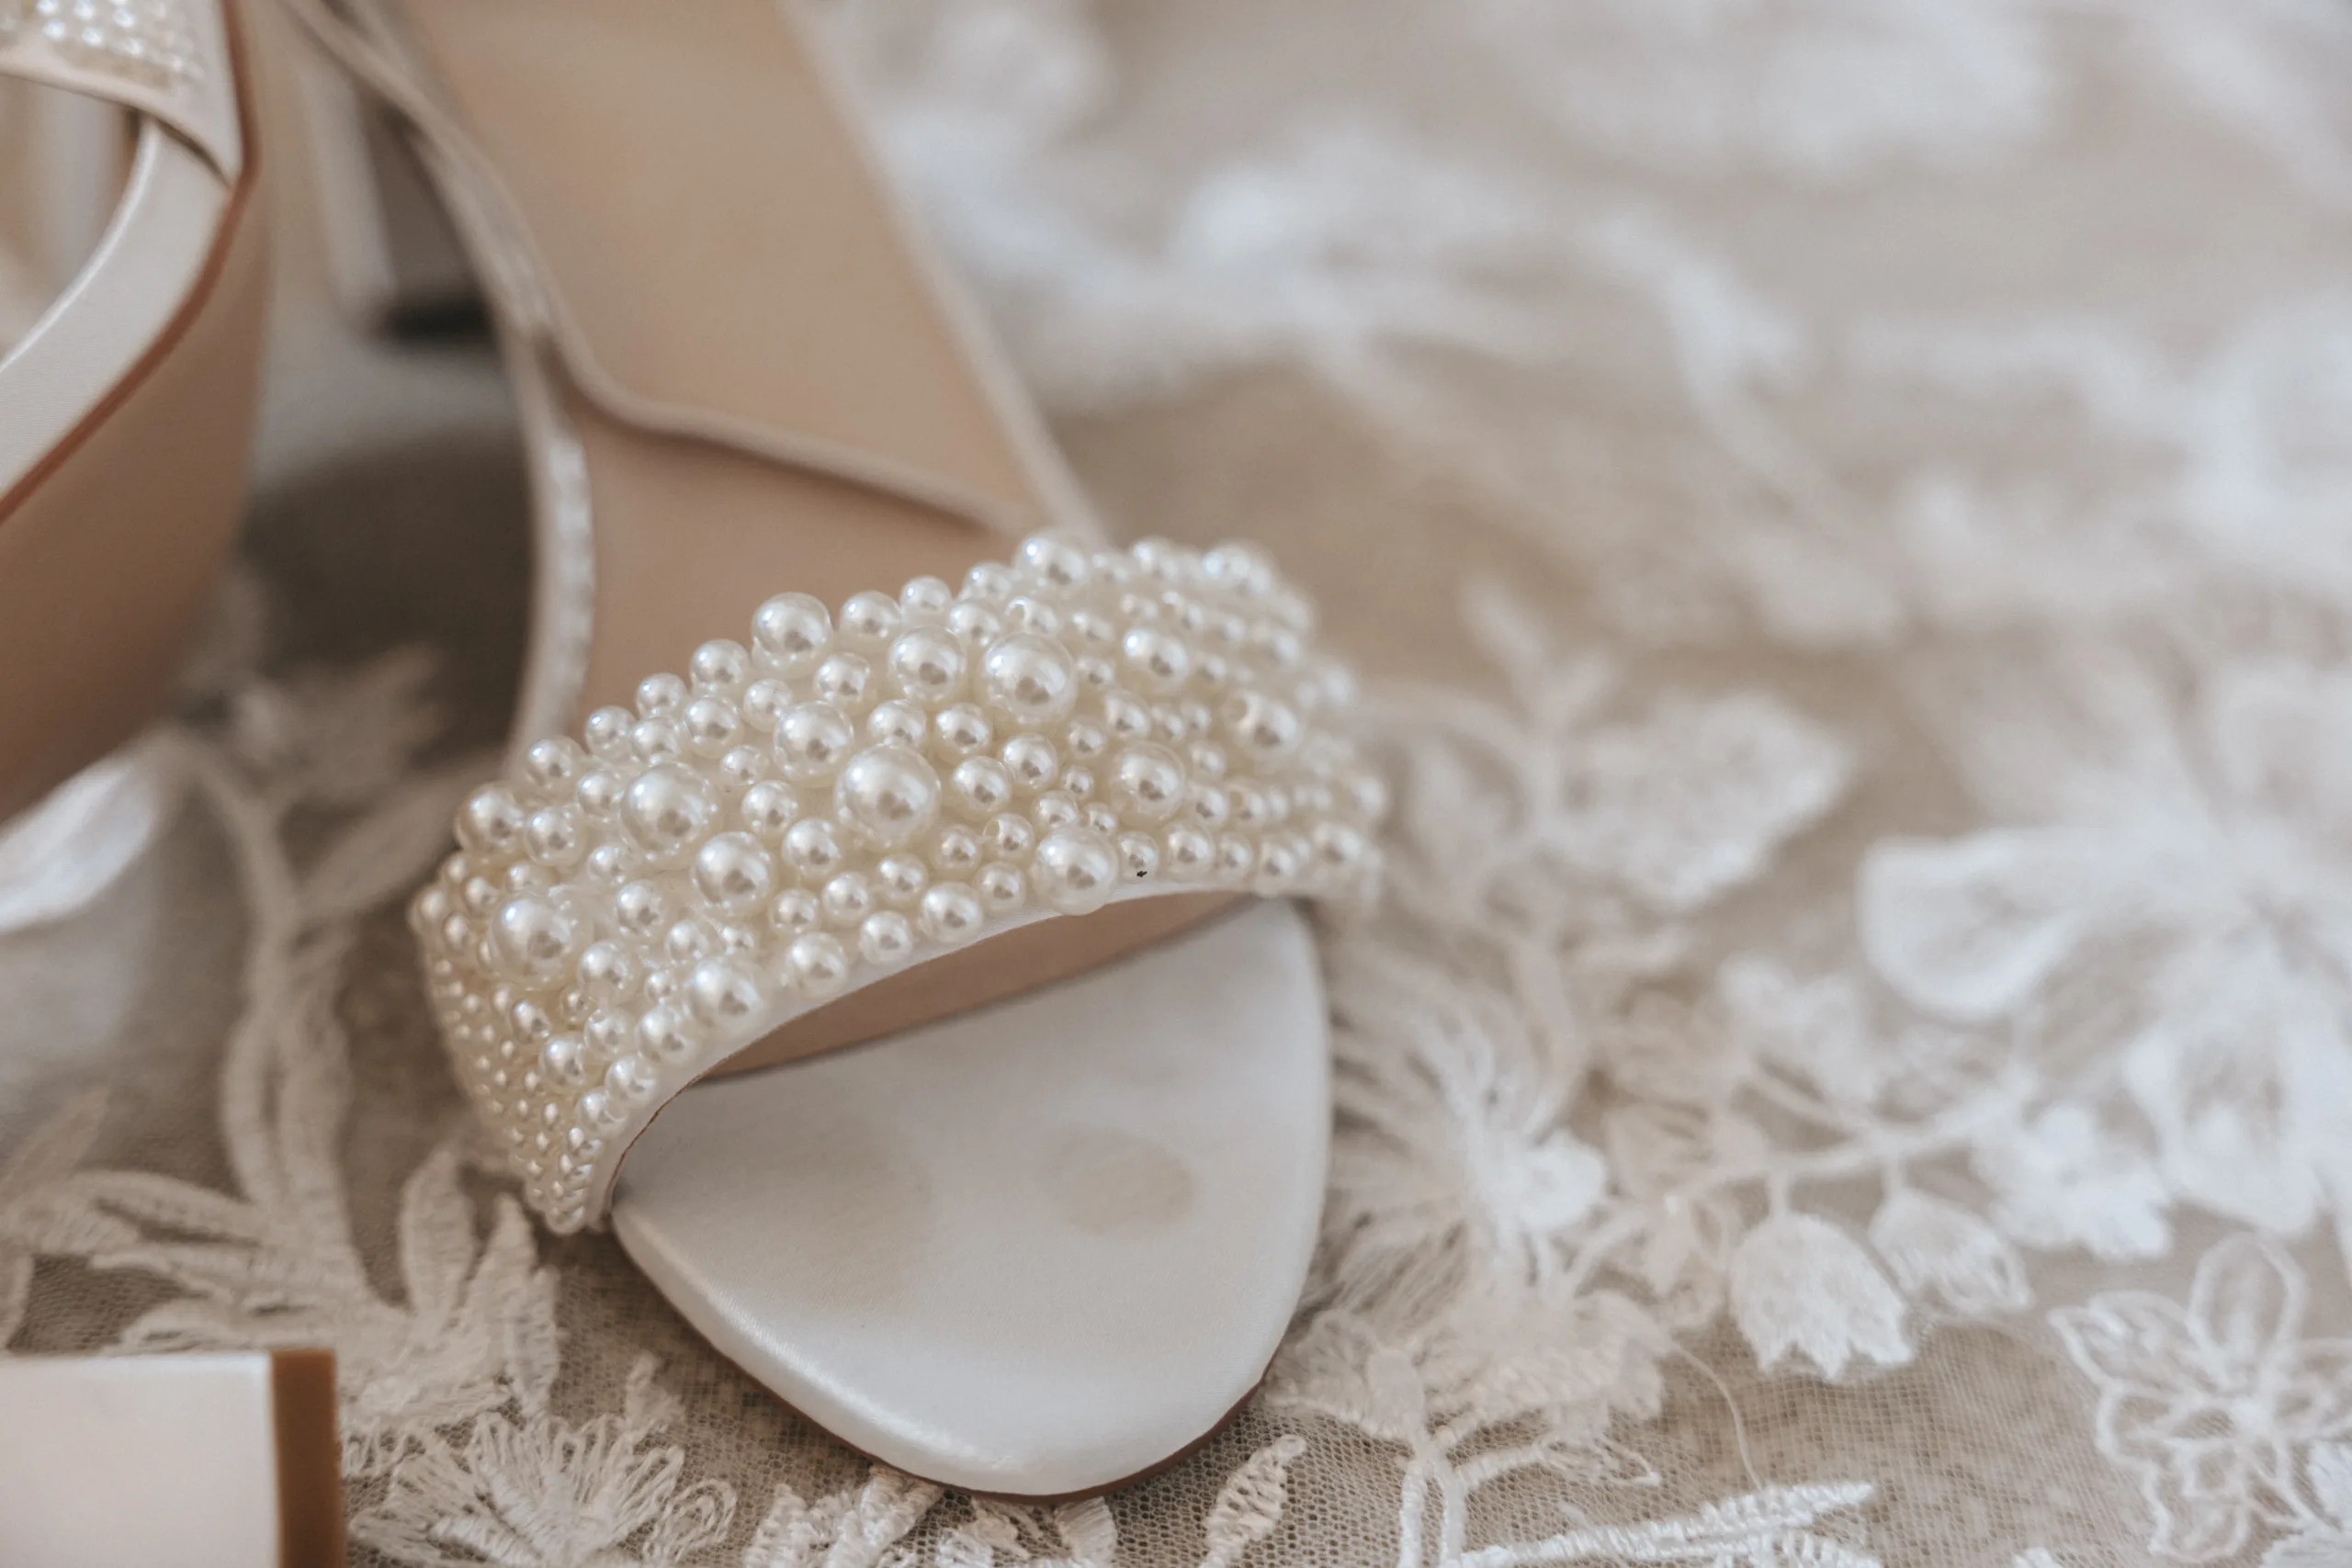 A pair of white wedding shoes adorned with pearls, perfect for a wedding day photoshoot.